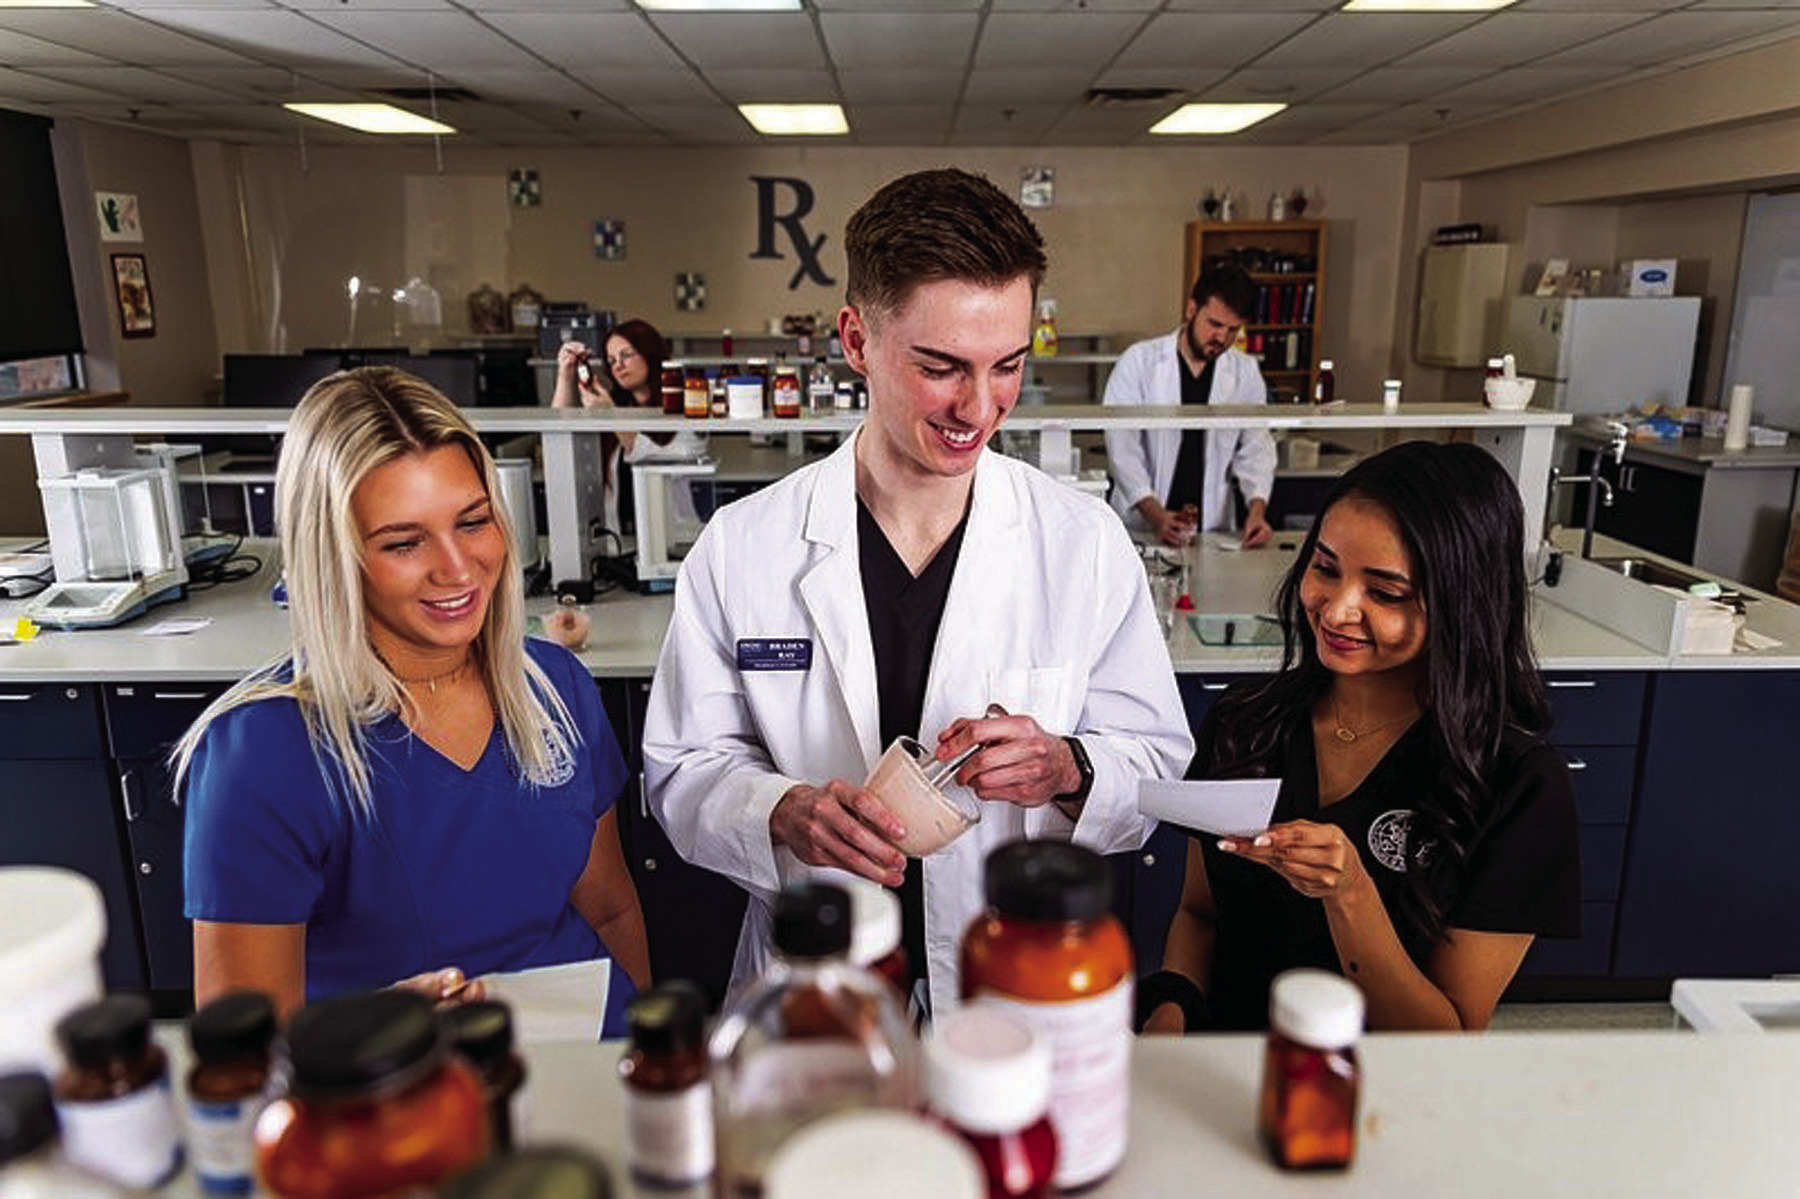 The Southwestern Oklahoma State University College of Pharmacy an will host open house 5:30-8 p.m. April 18 in the Chemistry Pharmacy and Physics building, in room 312.